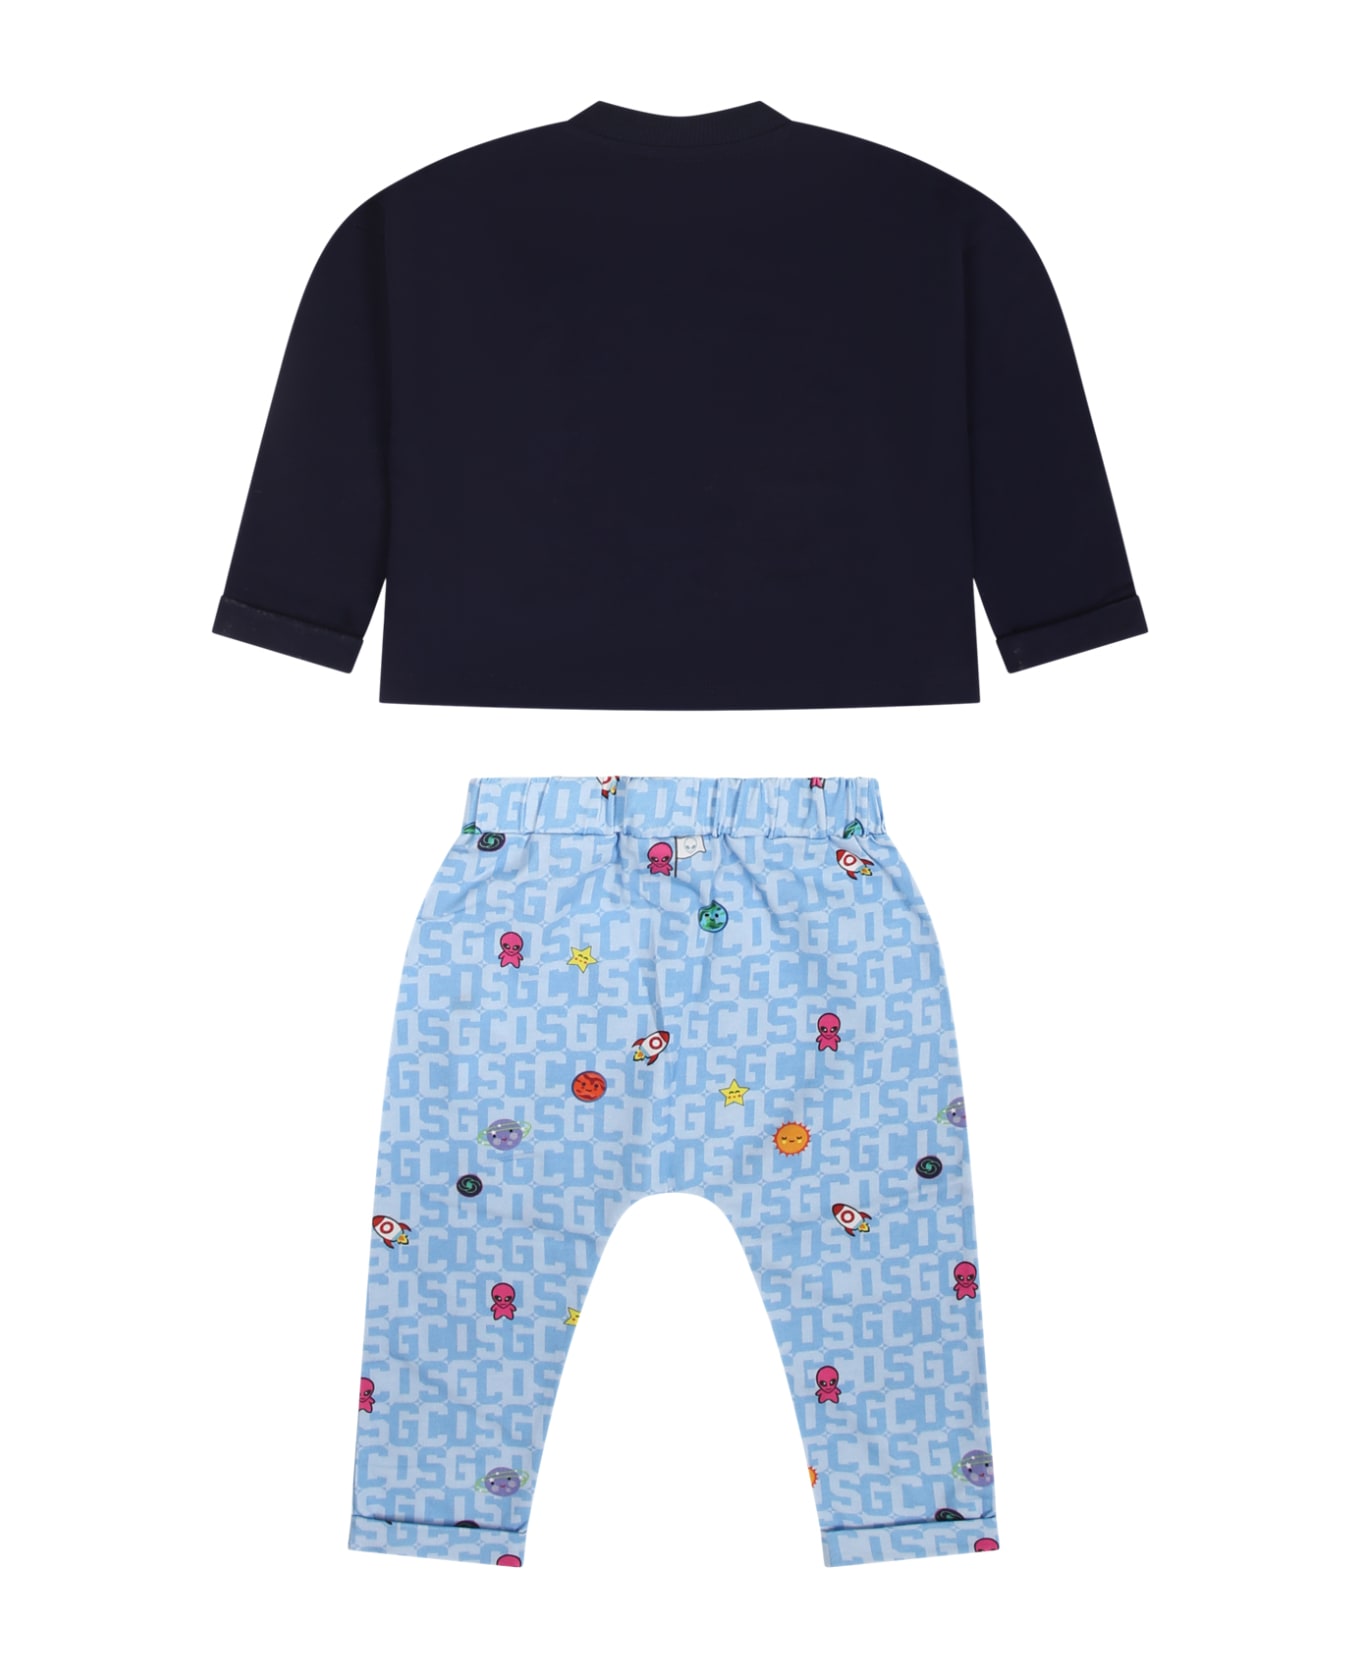 GCDS Mini Blue Pajamas For Baby Boy With Alien Print And Logo - Blue